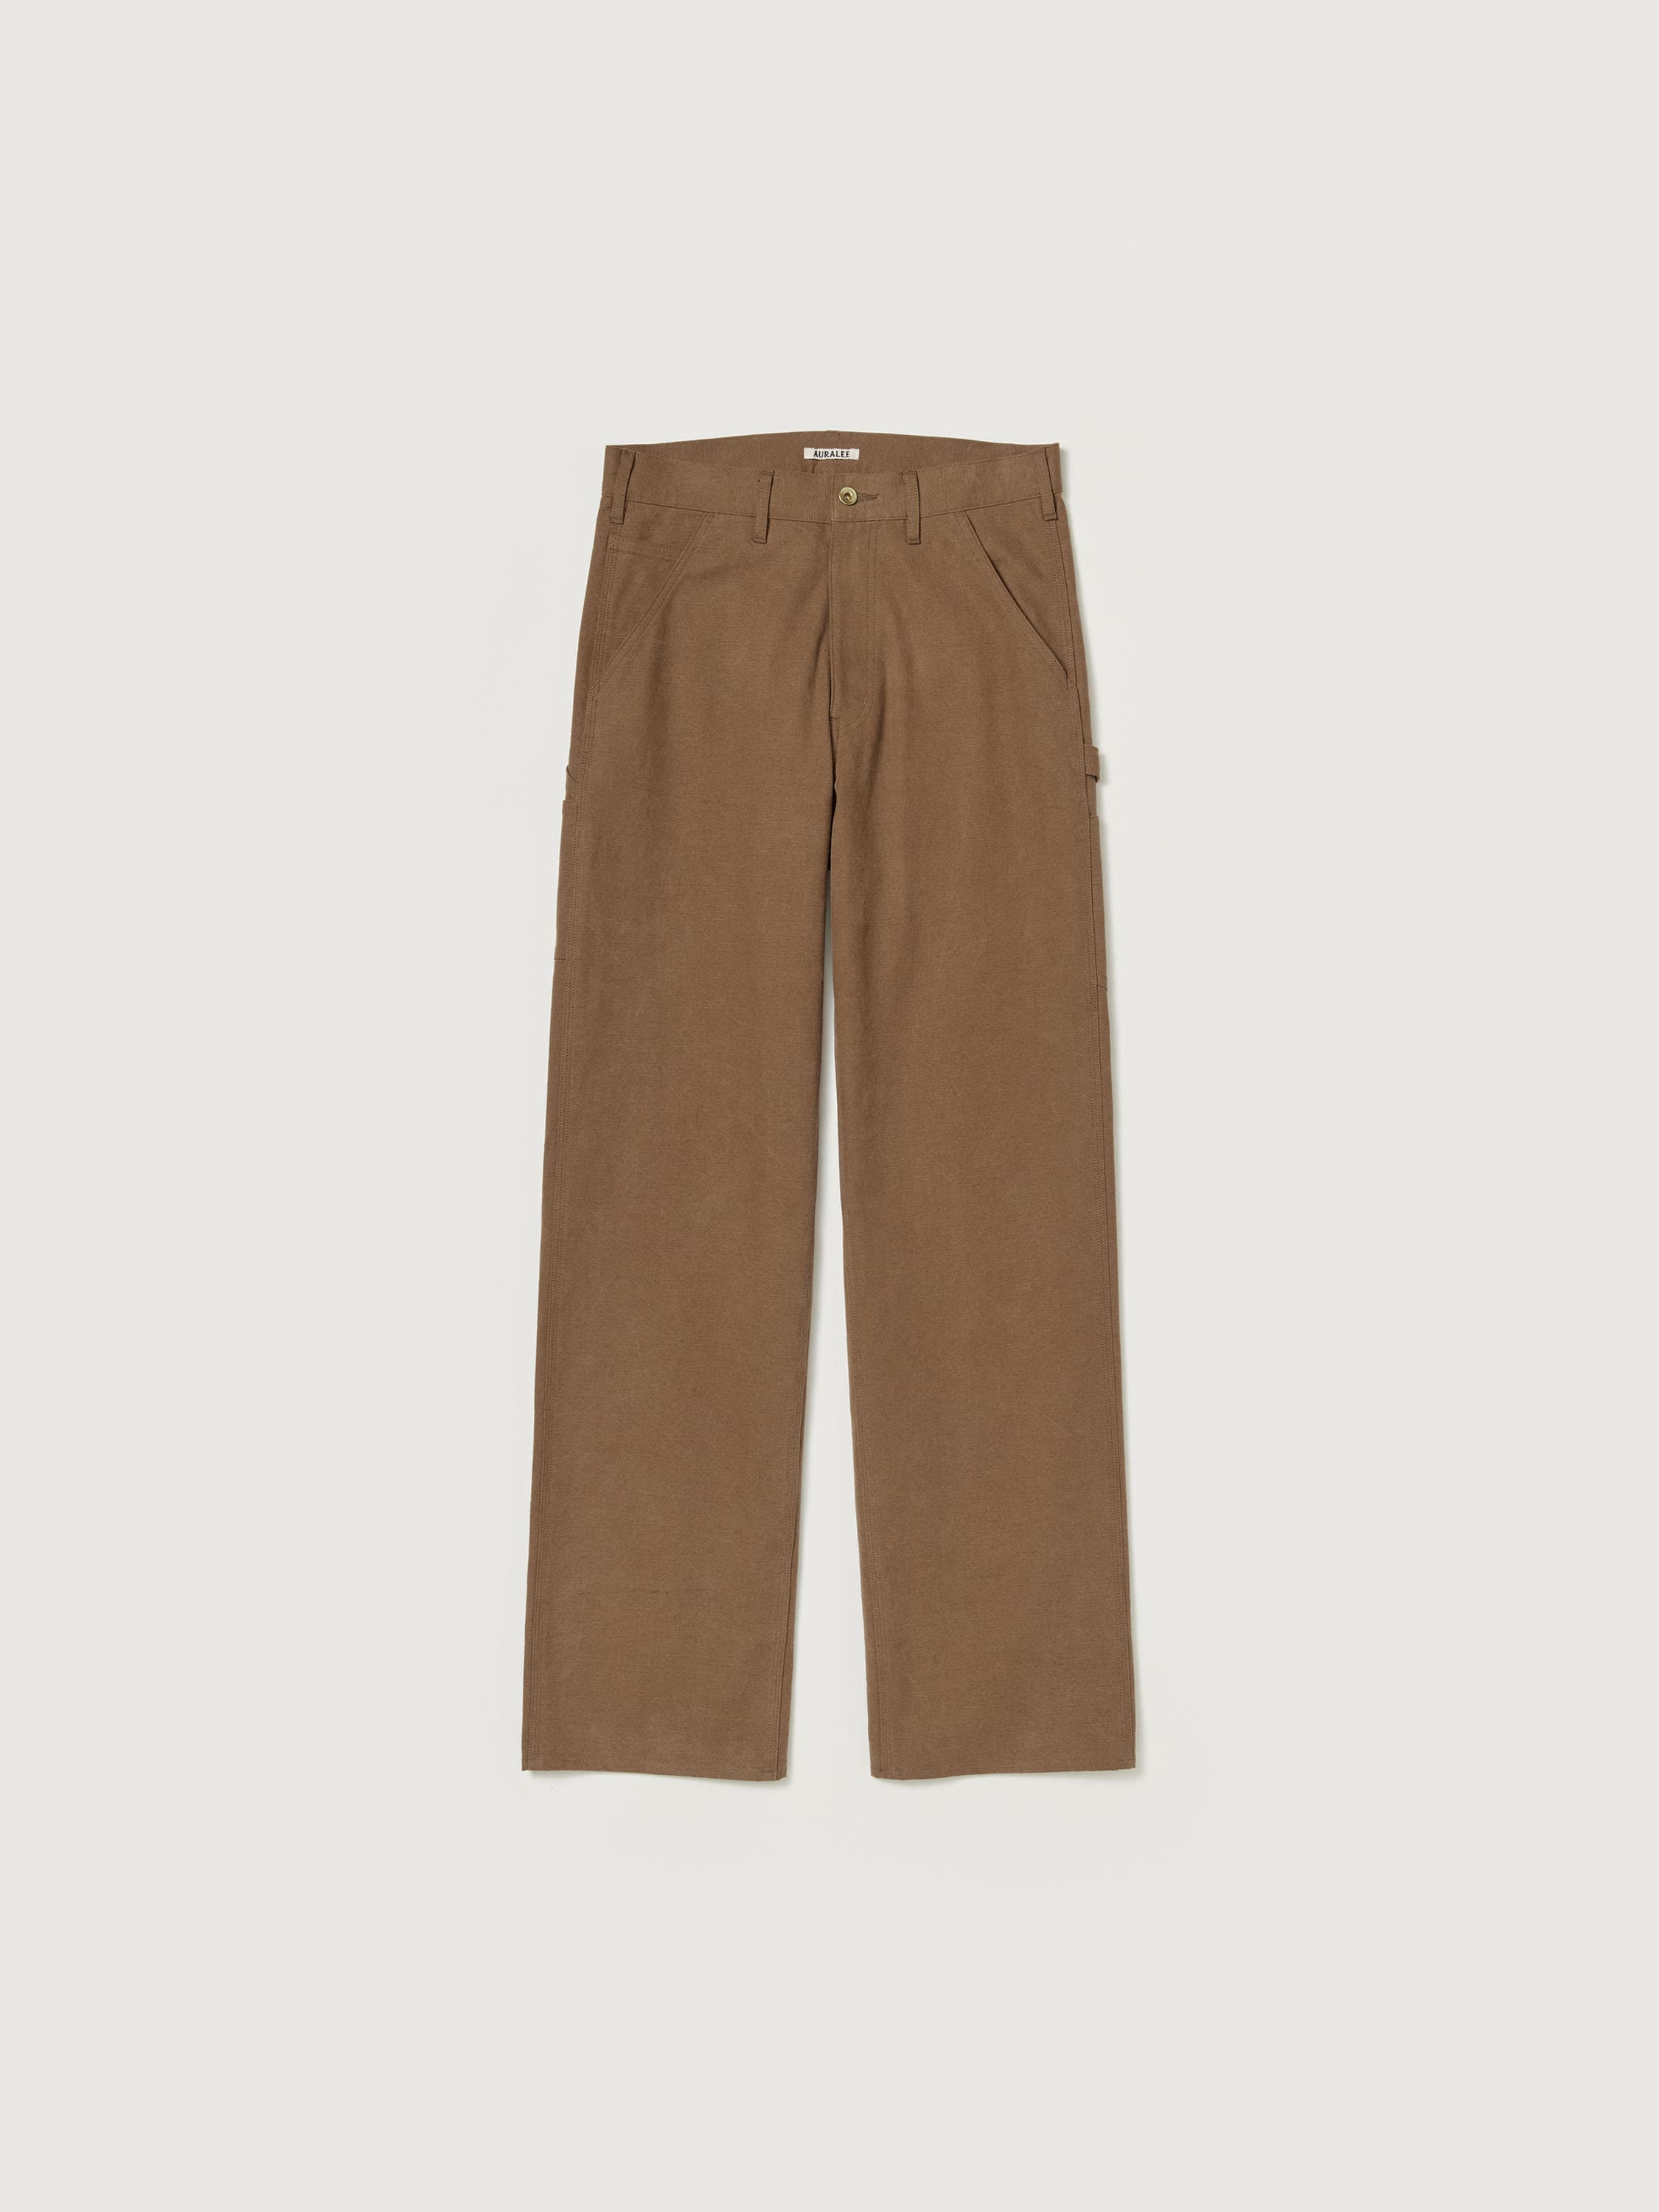 WASHED HEAVY CANVAS PANTS 詳細画像 BROWN 4